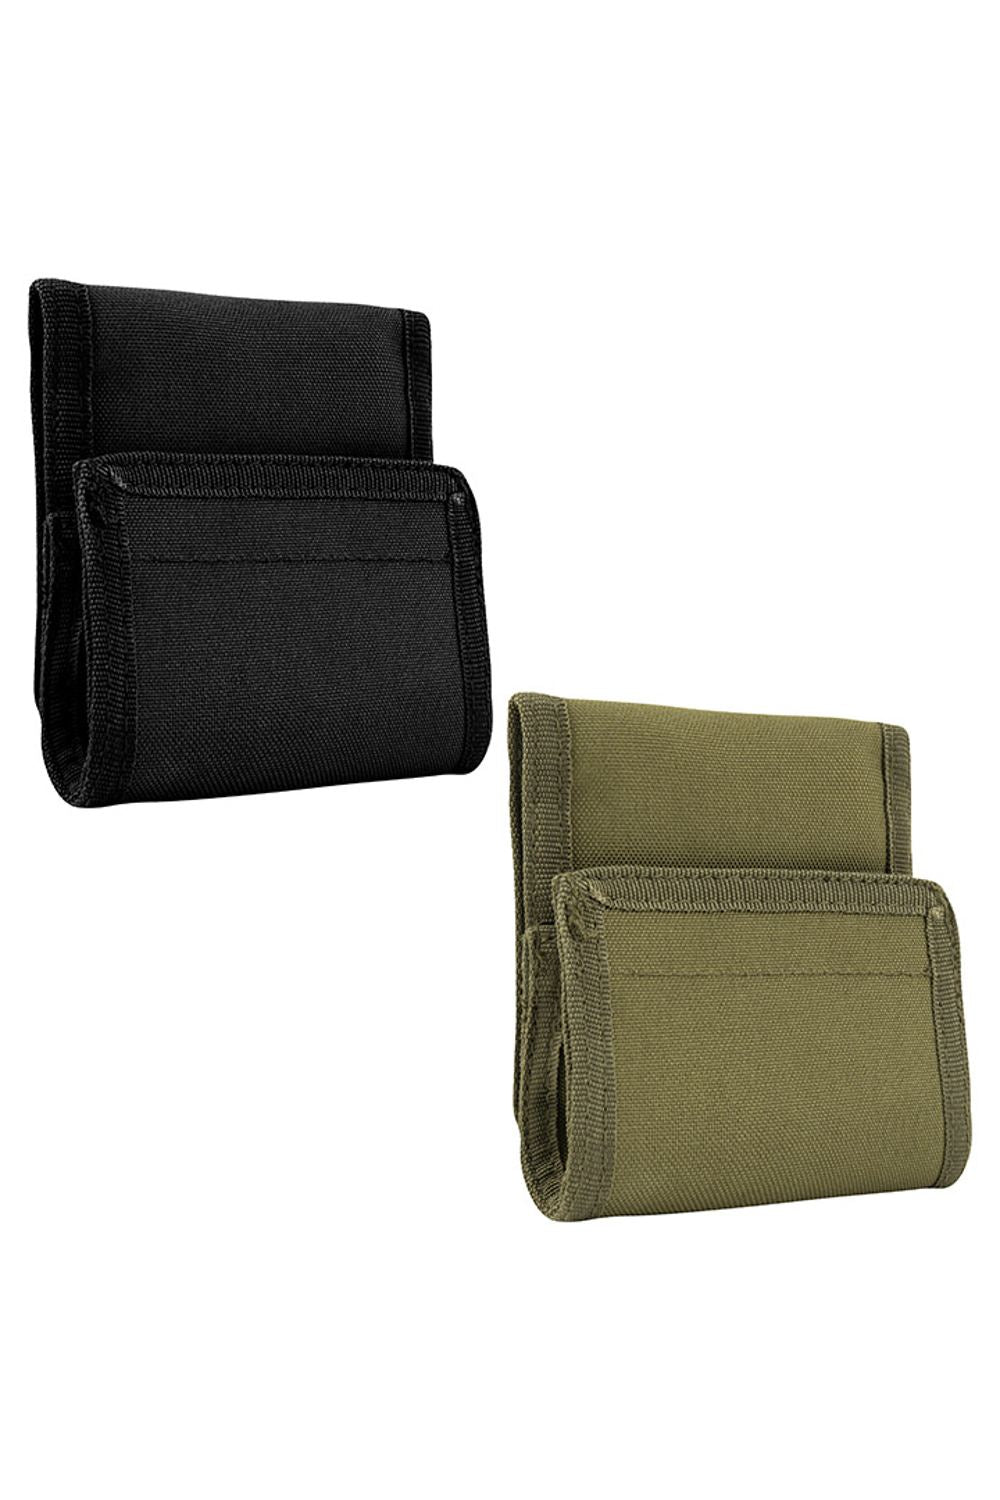 Jack Pyke Pellet Pouch in Black and Green 